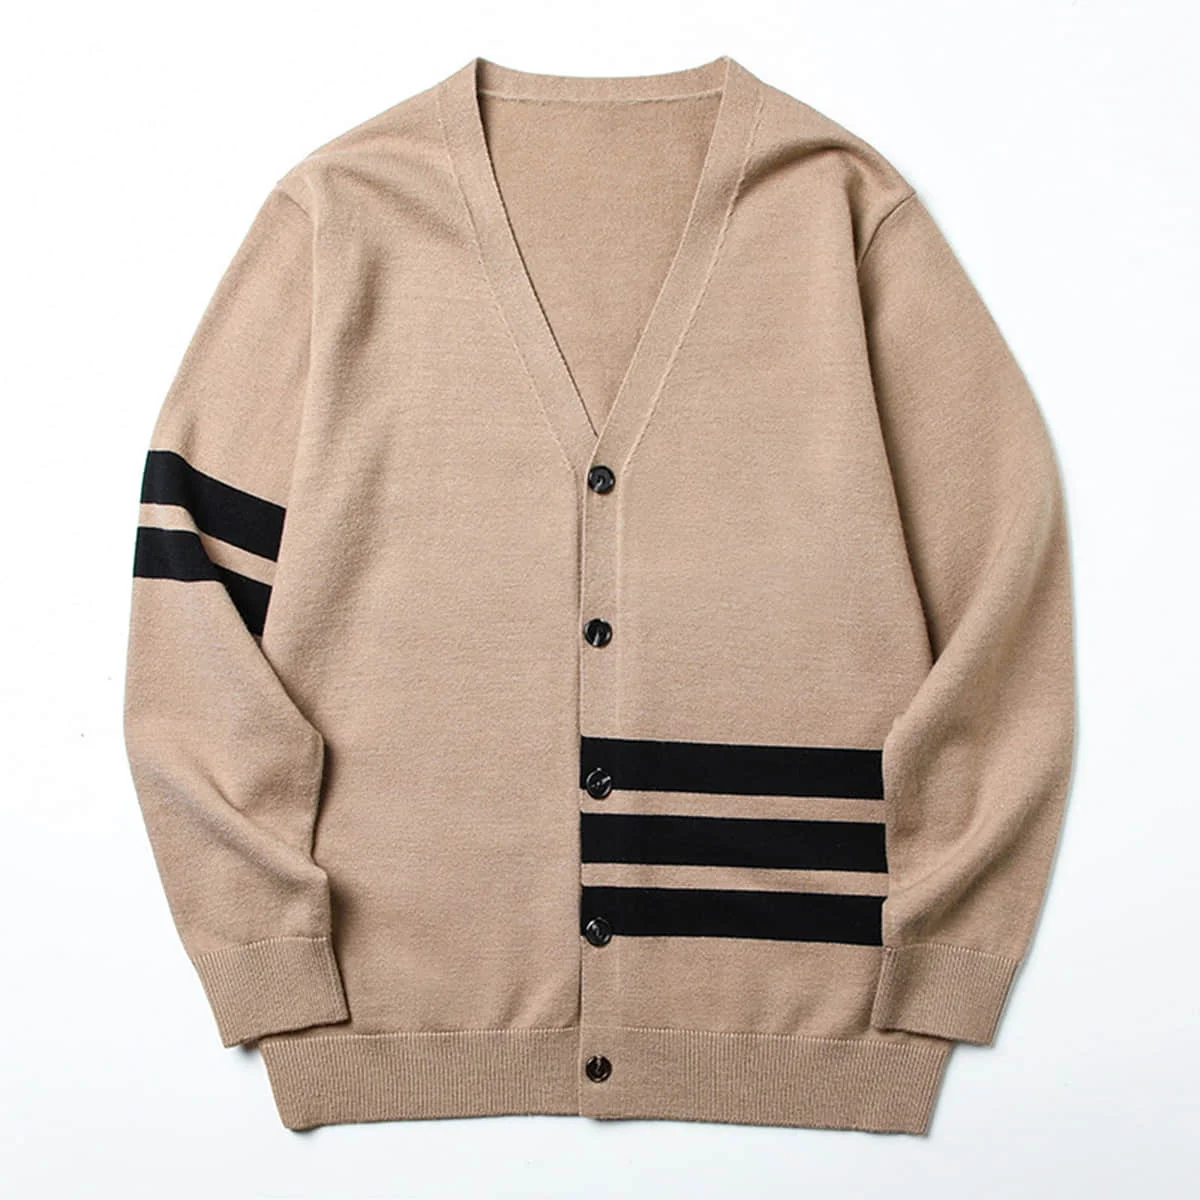 

Mens Cardigan Luxury Fashion Brand Stripe Classic V-neck Jacquard Sweater Wool-blend Knitted Cardigan Males Style Cardigans